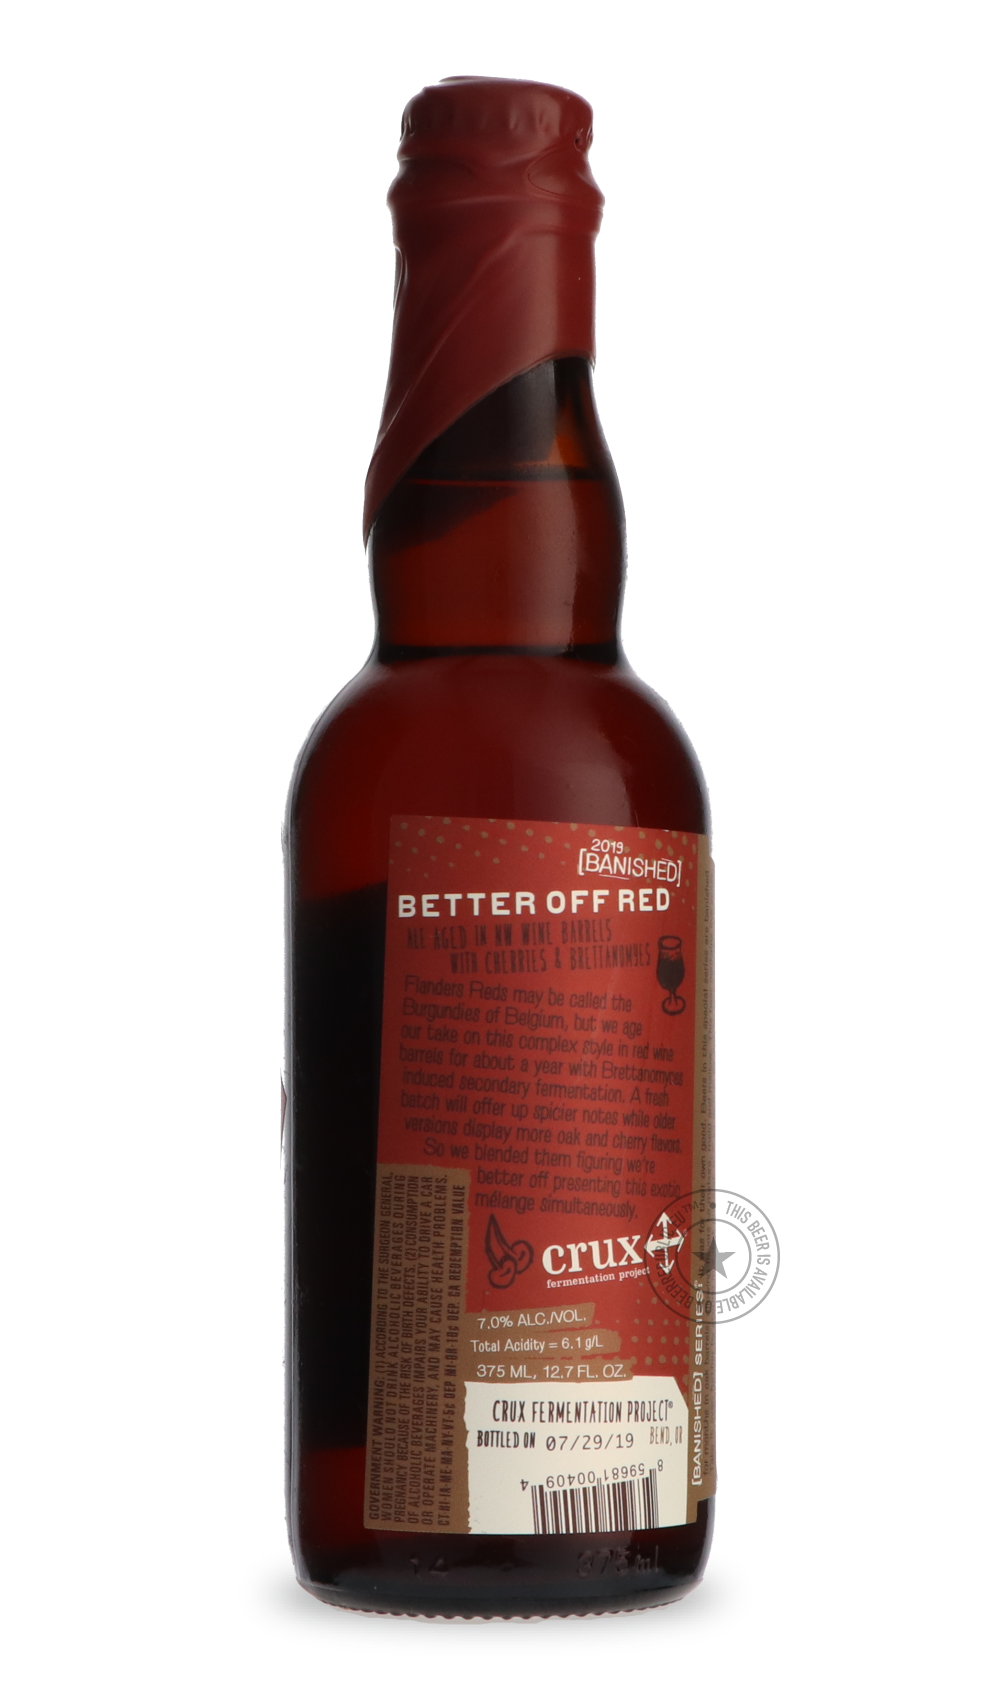 -Crux- Better Of Red-Sour / Wild & Fruity- Only @ Beer Republic - The best online beer store for American & Canadian craft beer - Buy beer online from the USA and Canada - Bier online kopen - Amerikaans bier kopen - Craft beer store - Craft beer kopen - Amerikanisch bier kaufen - Bier online kaufen - Acheter biere online - IPA - Stout - Porter - New England IPA - Hazy IPA - Imperial Stout - Barrel Aged - Barrel Aged Imperial Stout - Brown - Dark beer - Blond - Blonde - Pilsner - Lager - Wheat - Weizen - Amb